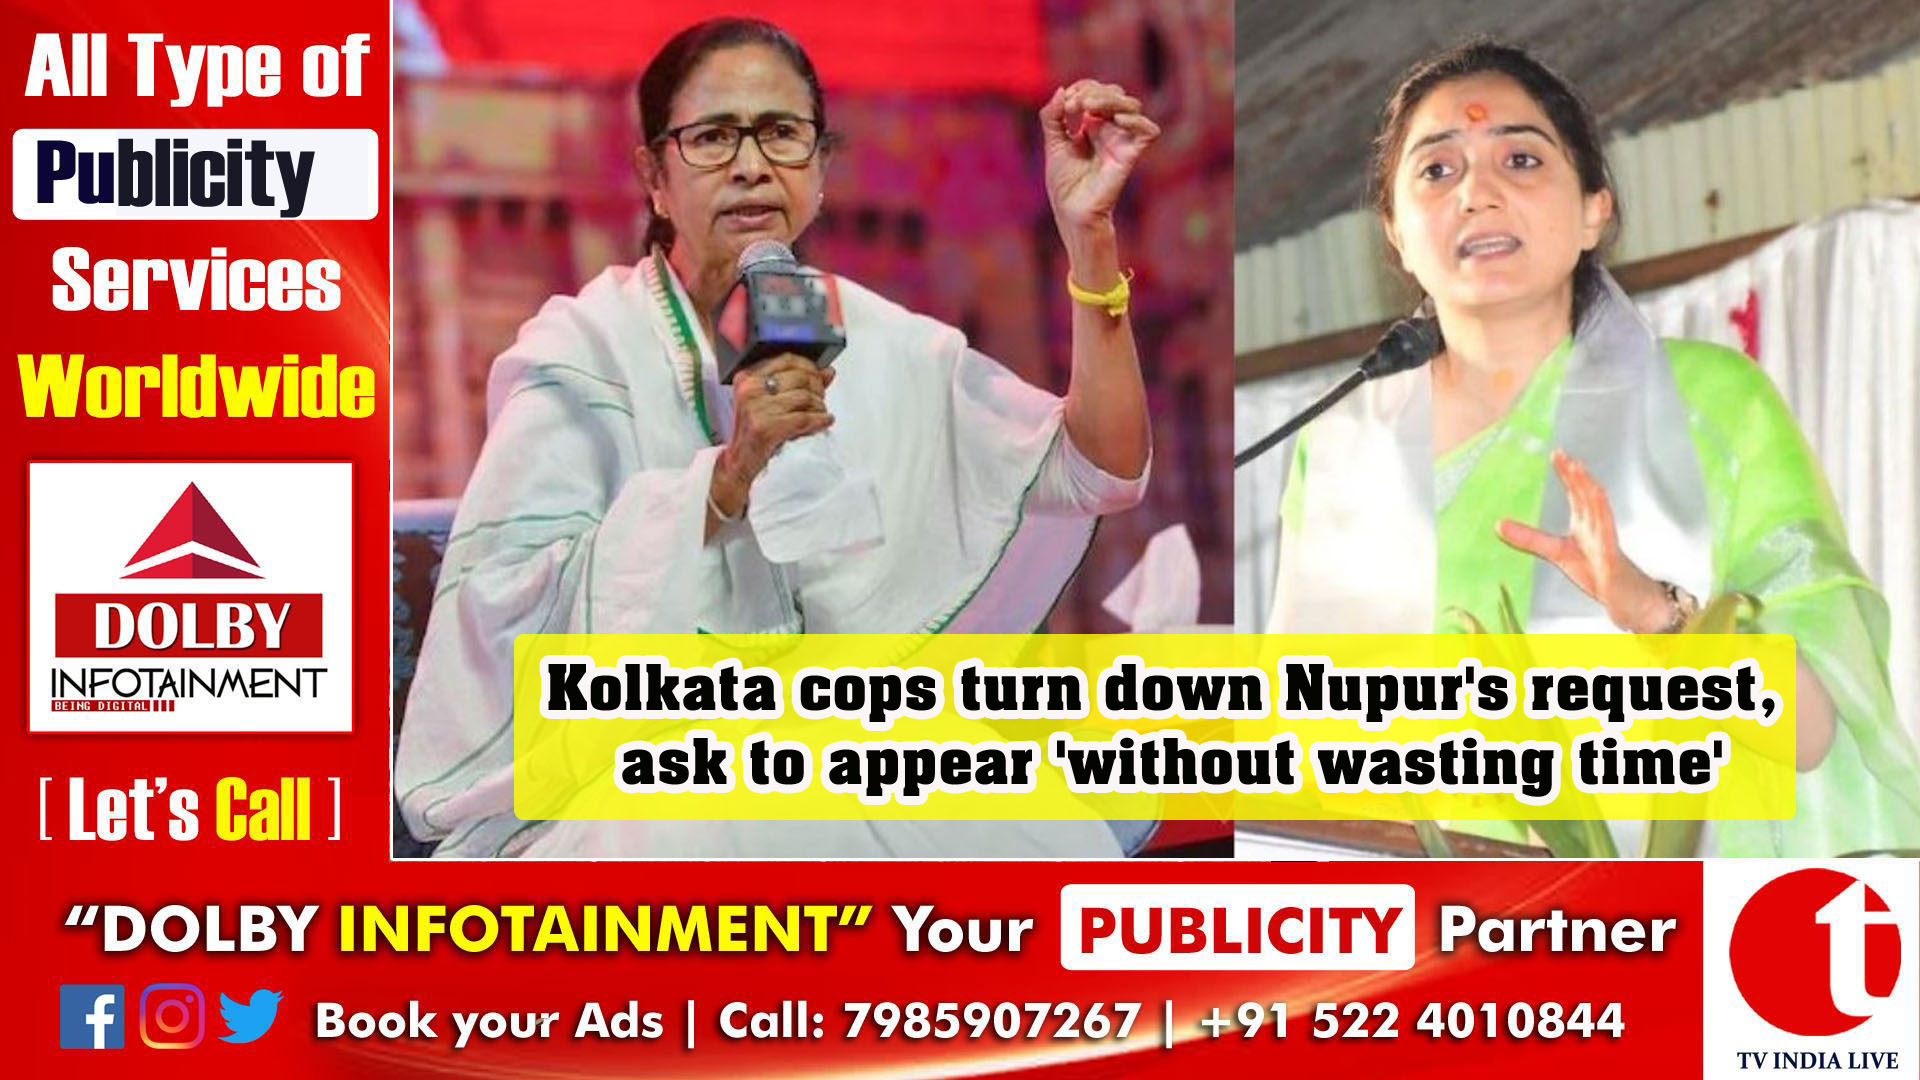 Kolkata cops turn down Nupur's request, ask to appear 'without wasting time'